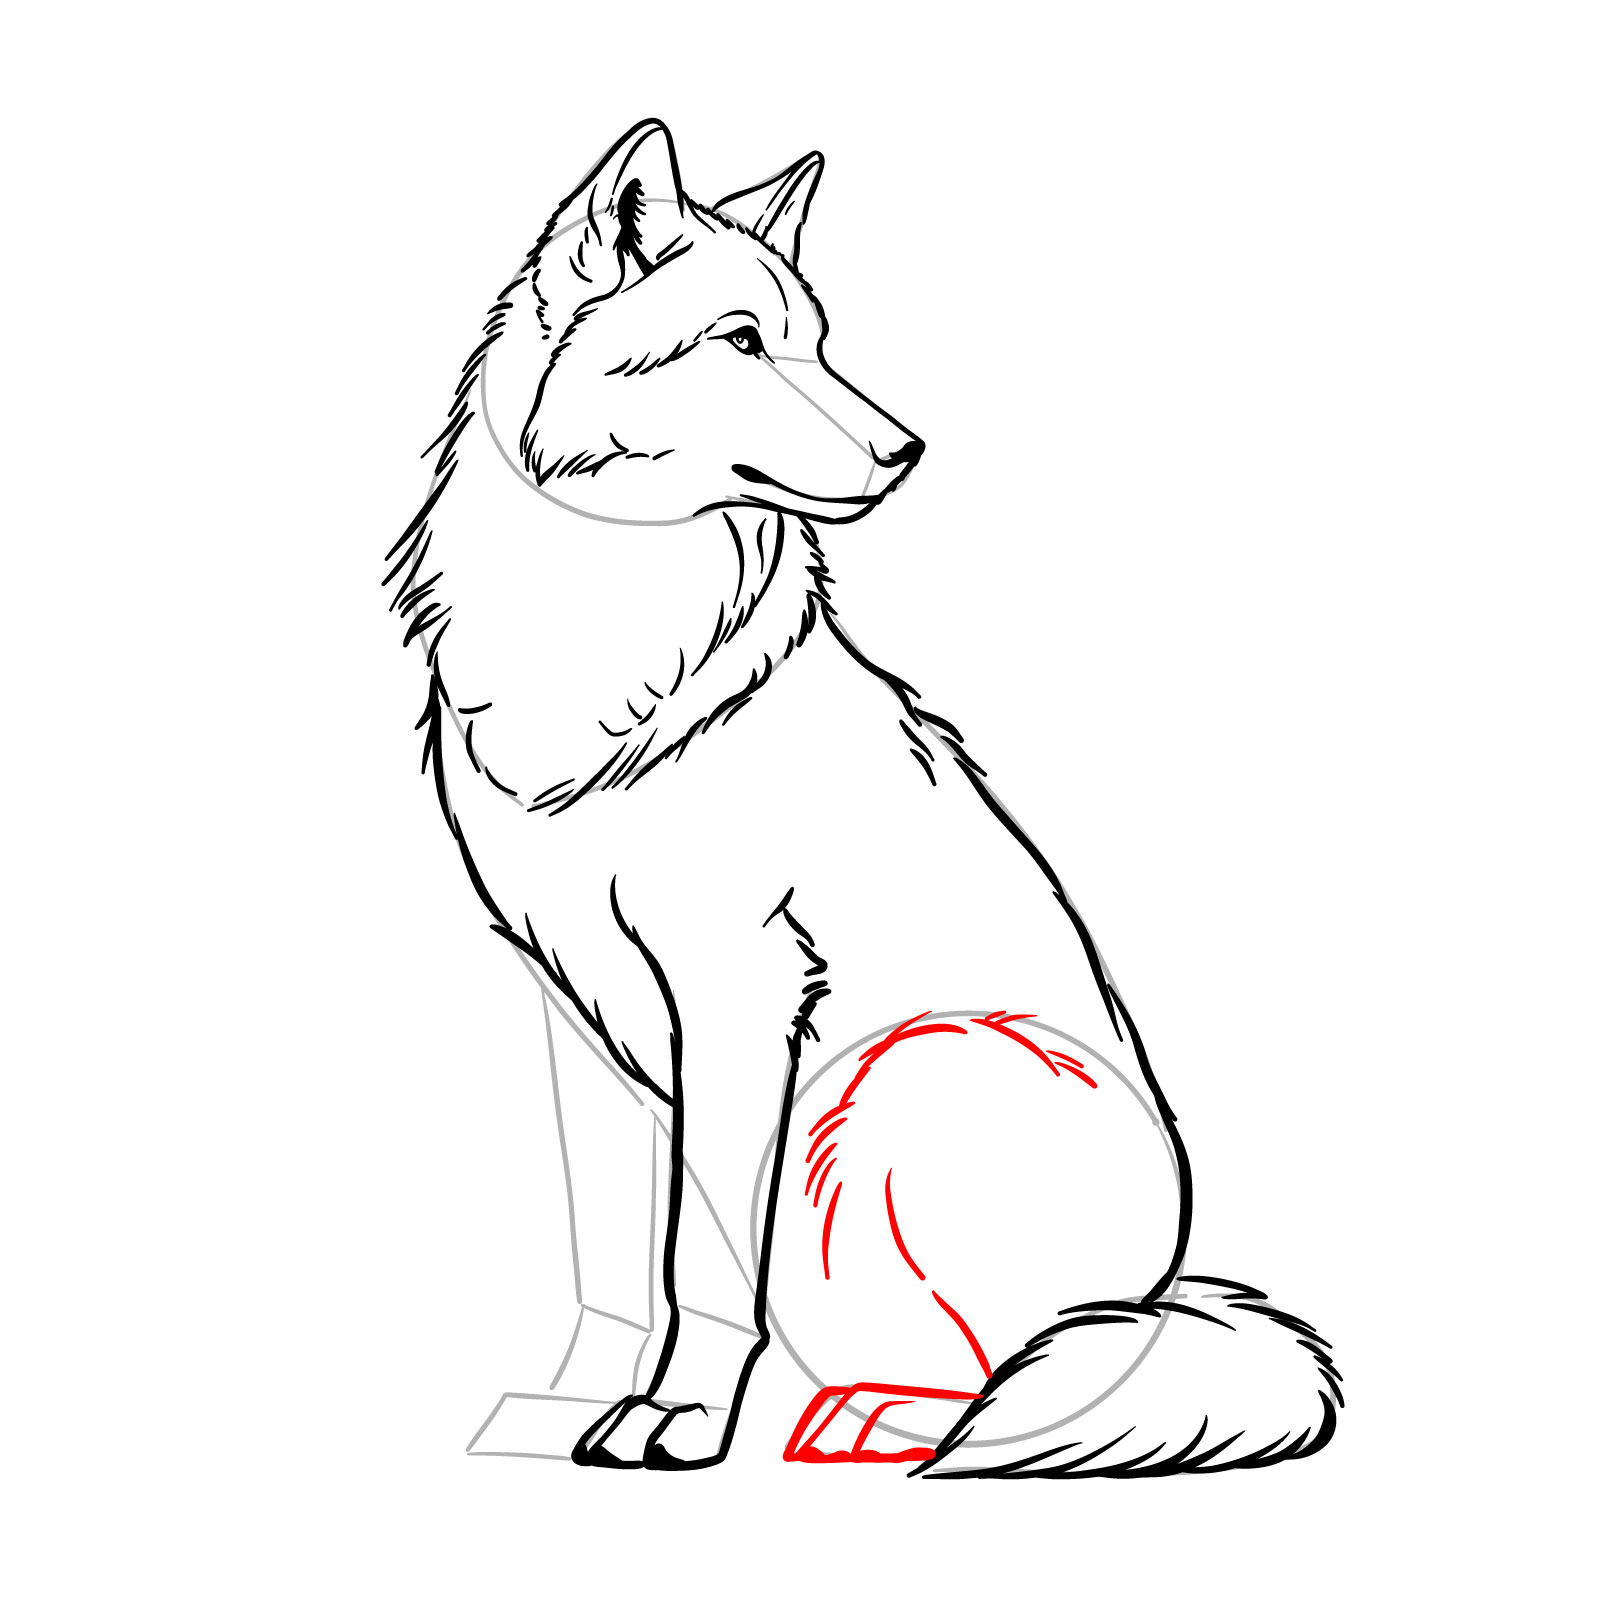 Shaping the rear leg of a seated wolf in a drawing - step 13